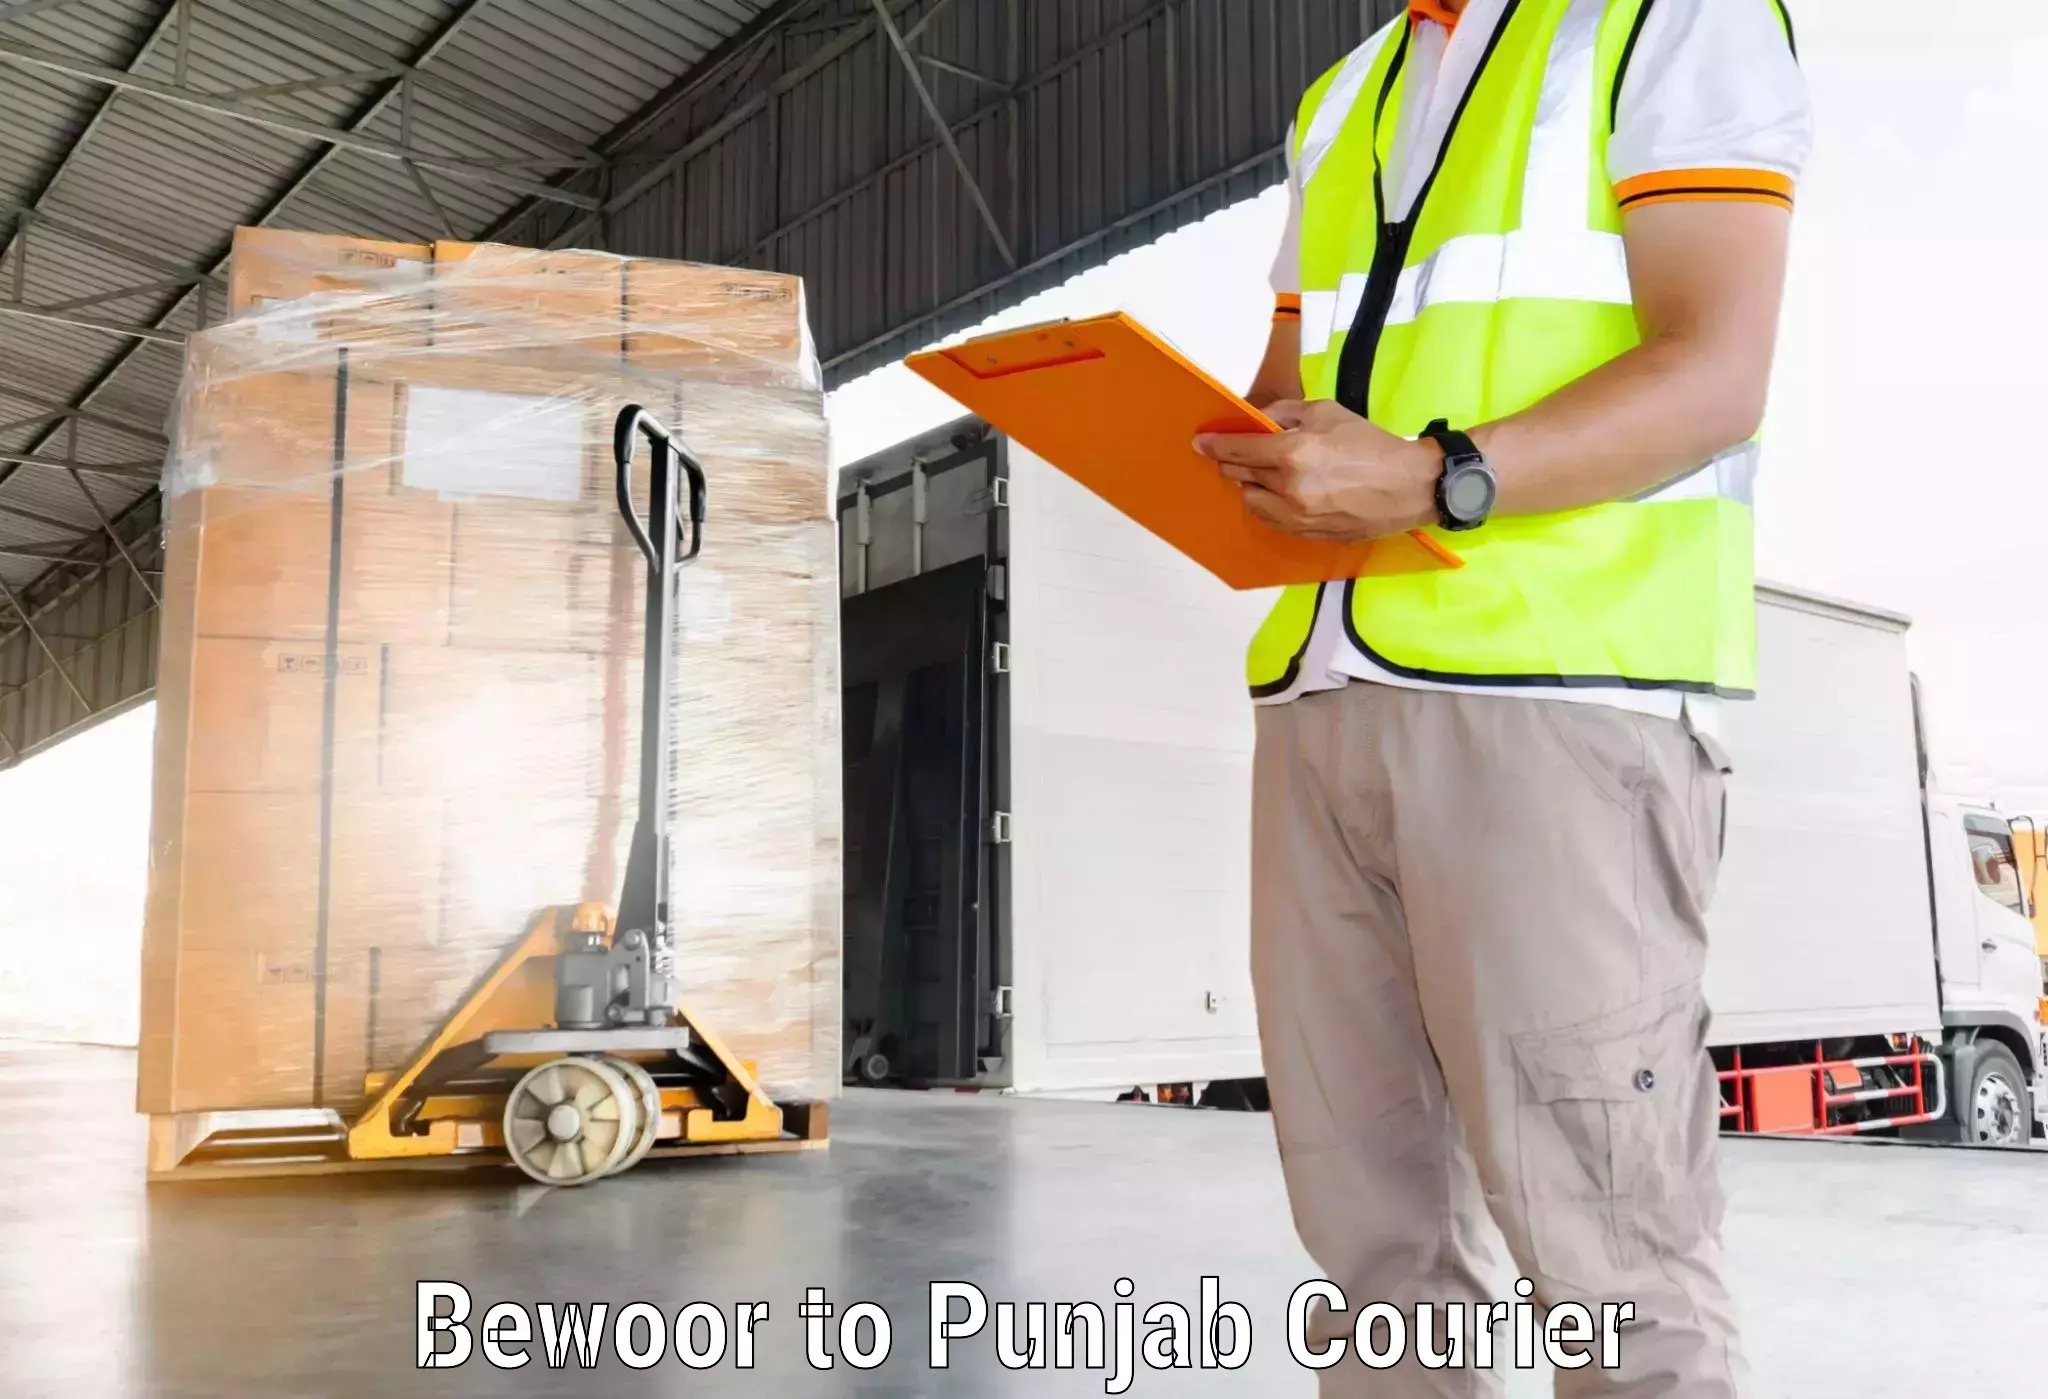 Overnight delivery services Bewoor to Central University of Punjab Bathinda